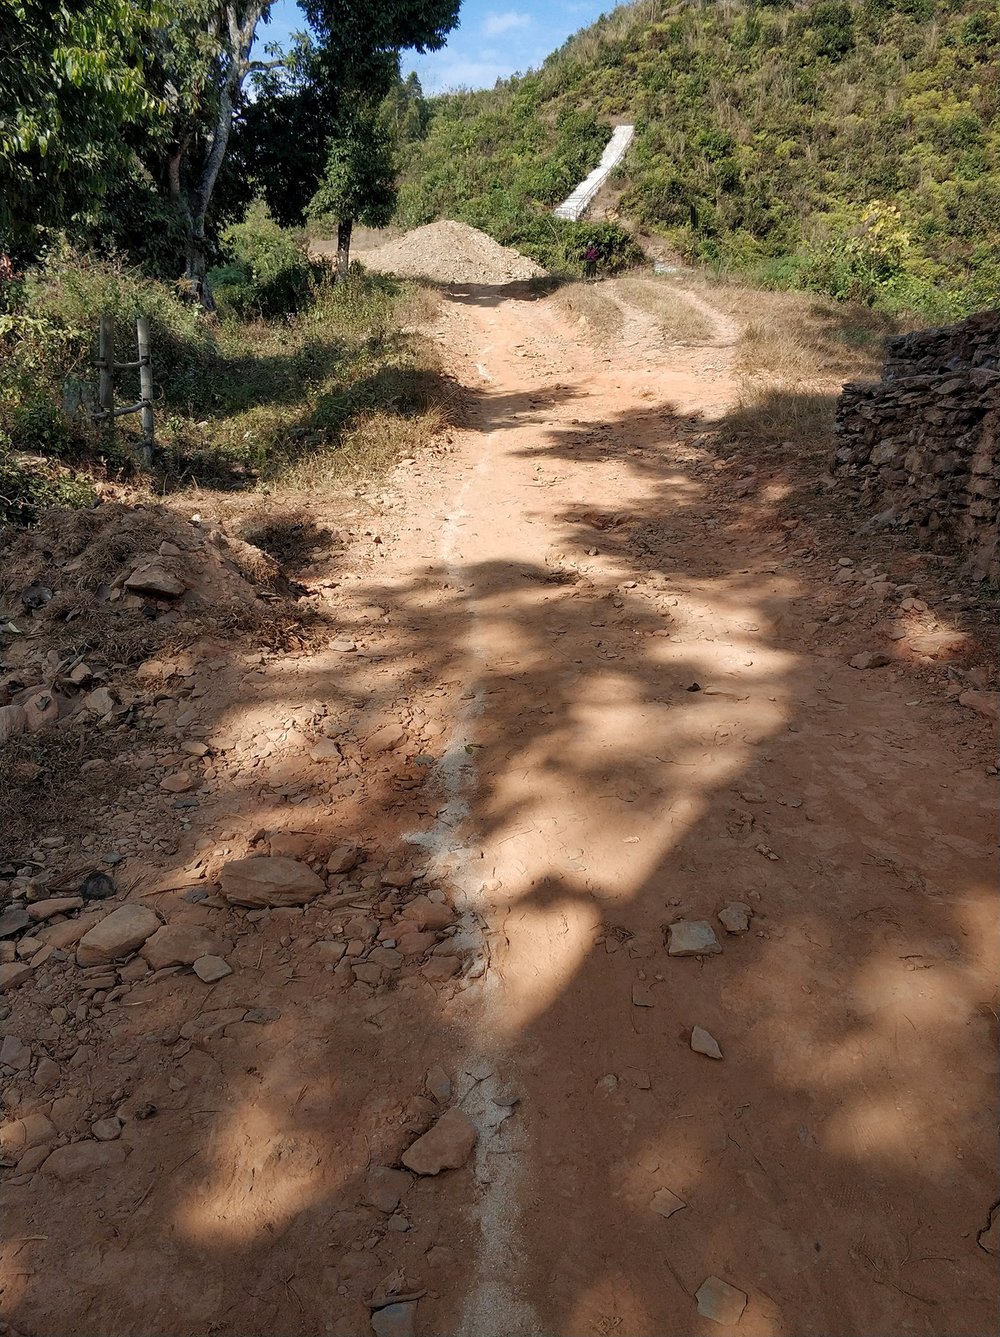  Pretty sure this was the first time we'd ever seen a dirt path with a dividing line before, which was amusing both because it's a dirt path in the middle of nowhere and because this is Nepal and dividing lines on roads are practically nonexistent ev